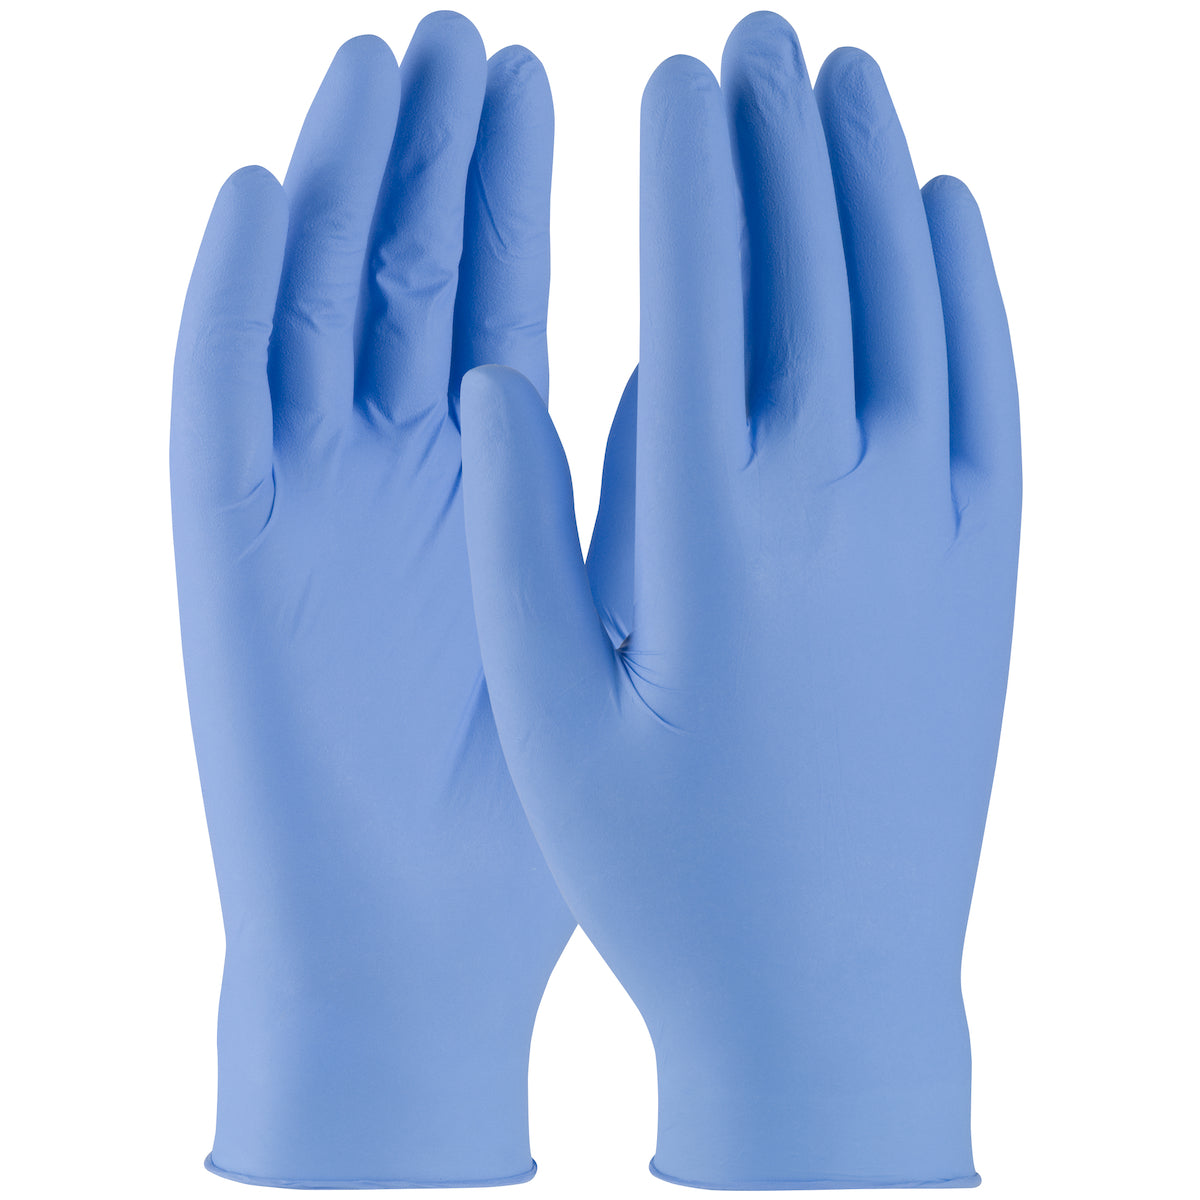 Ambi-dex 63-233PF/S Disposable Nitrile Glove. Powder Free with Finger Textured Grip -3 mil